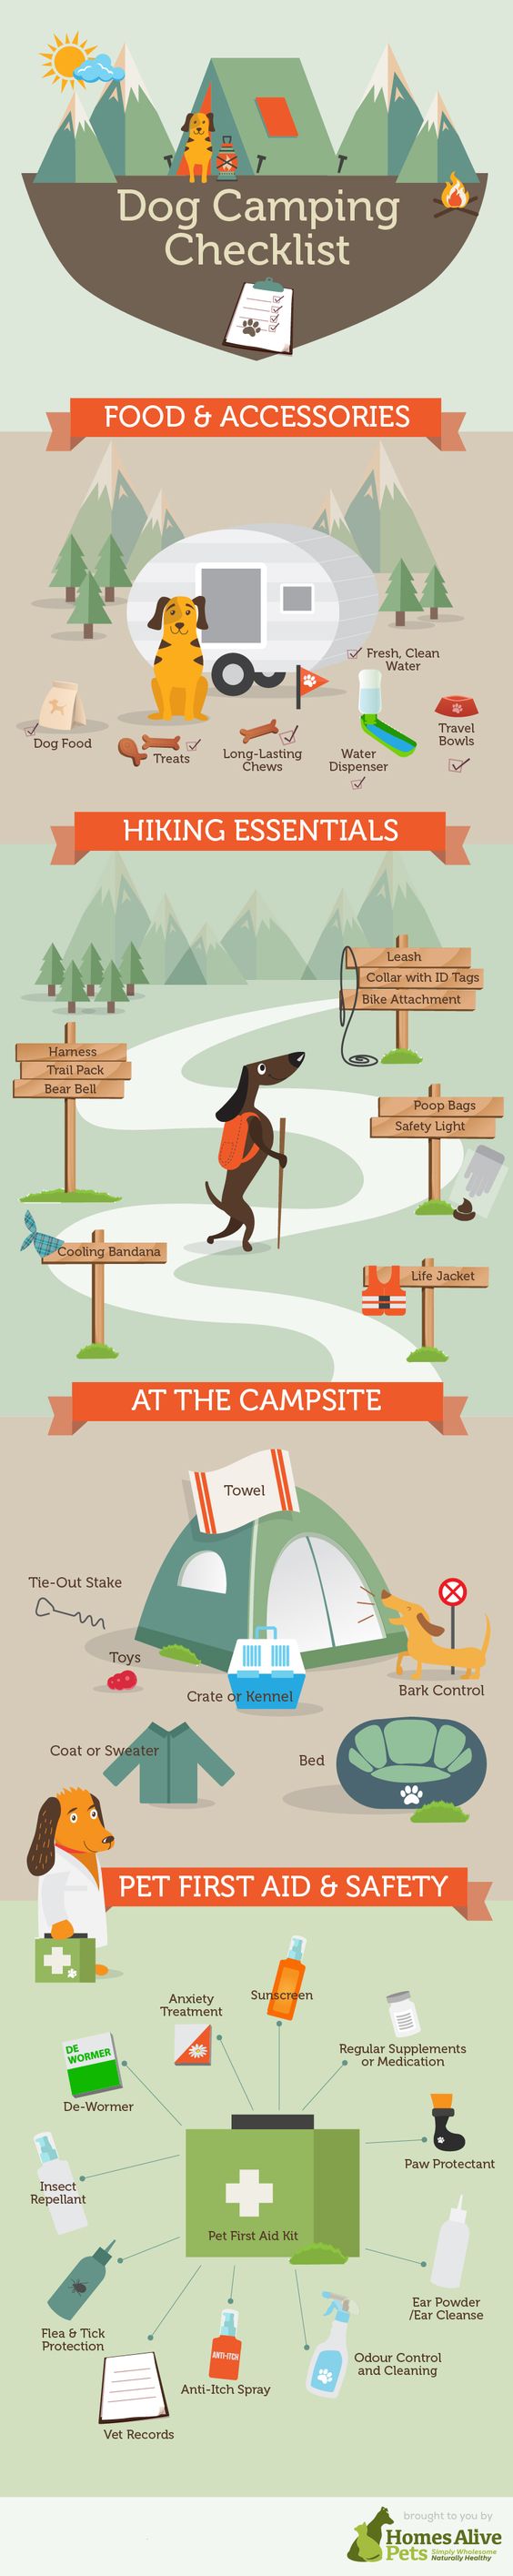 Dog Camping Checklist #infographic #Dog #Pets #Travel